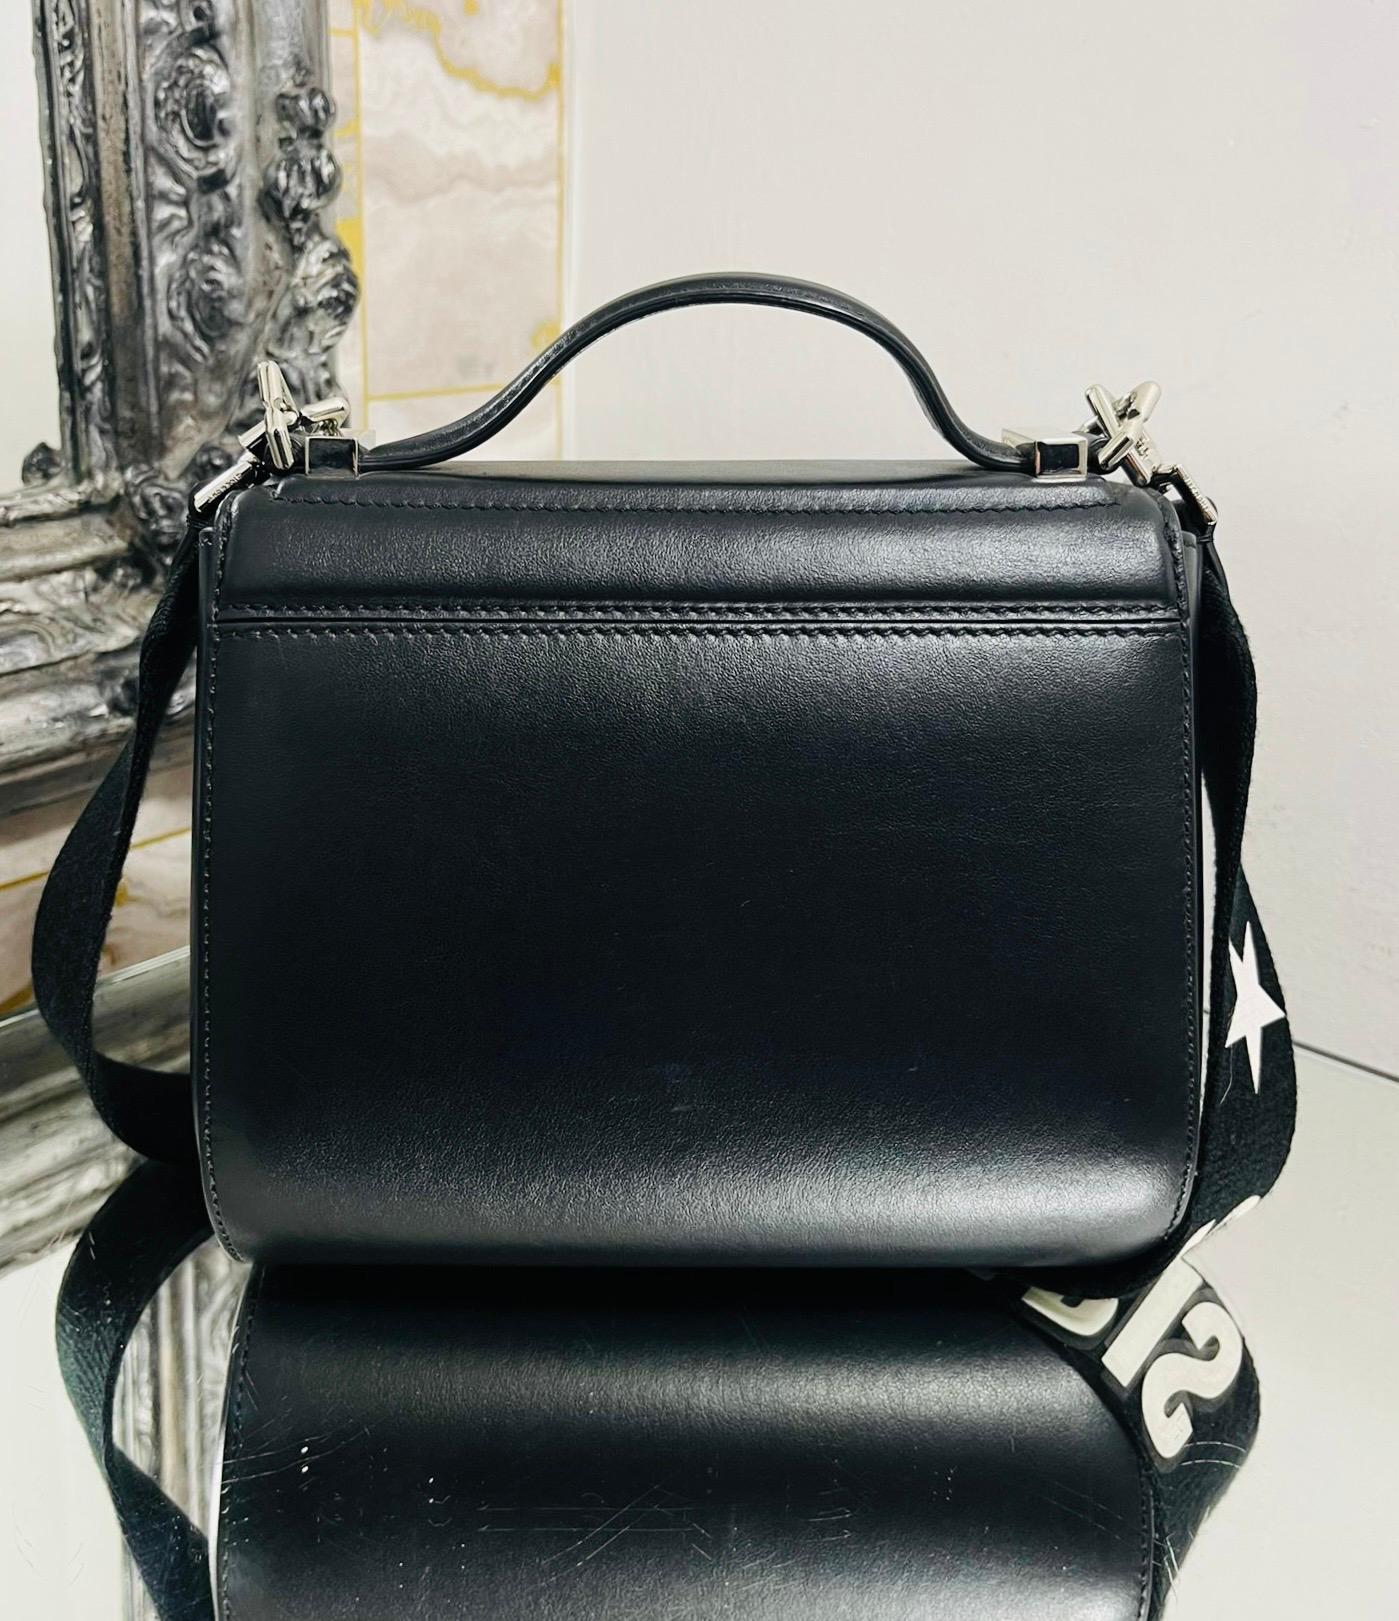 Givenchy Pandora Box Logo Leather Bag In Excellent Condition For Sale In London, GB